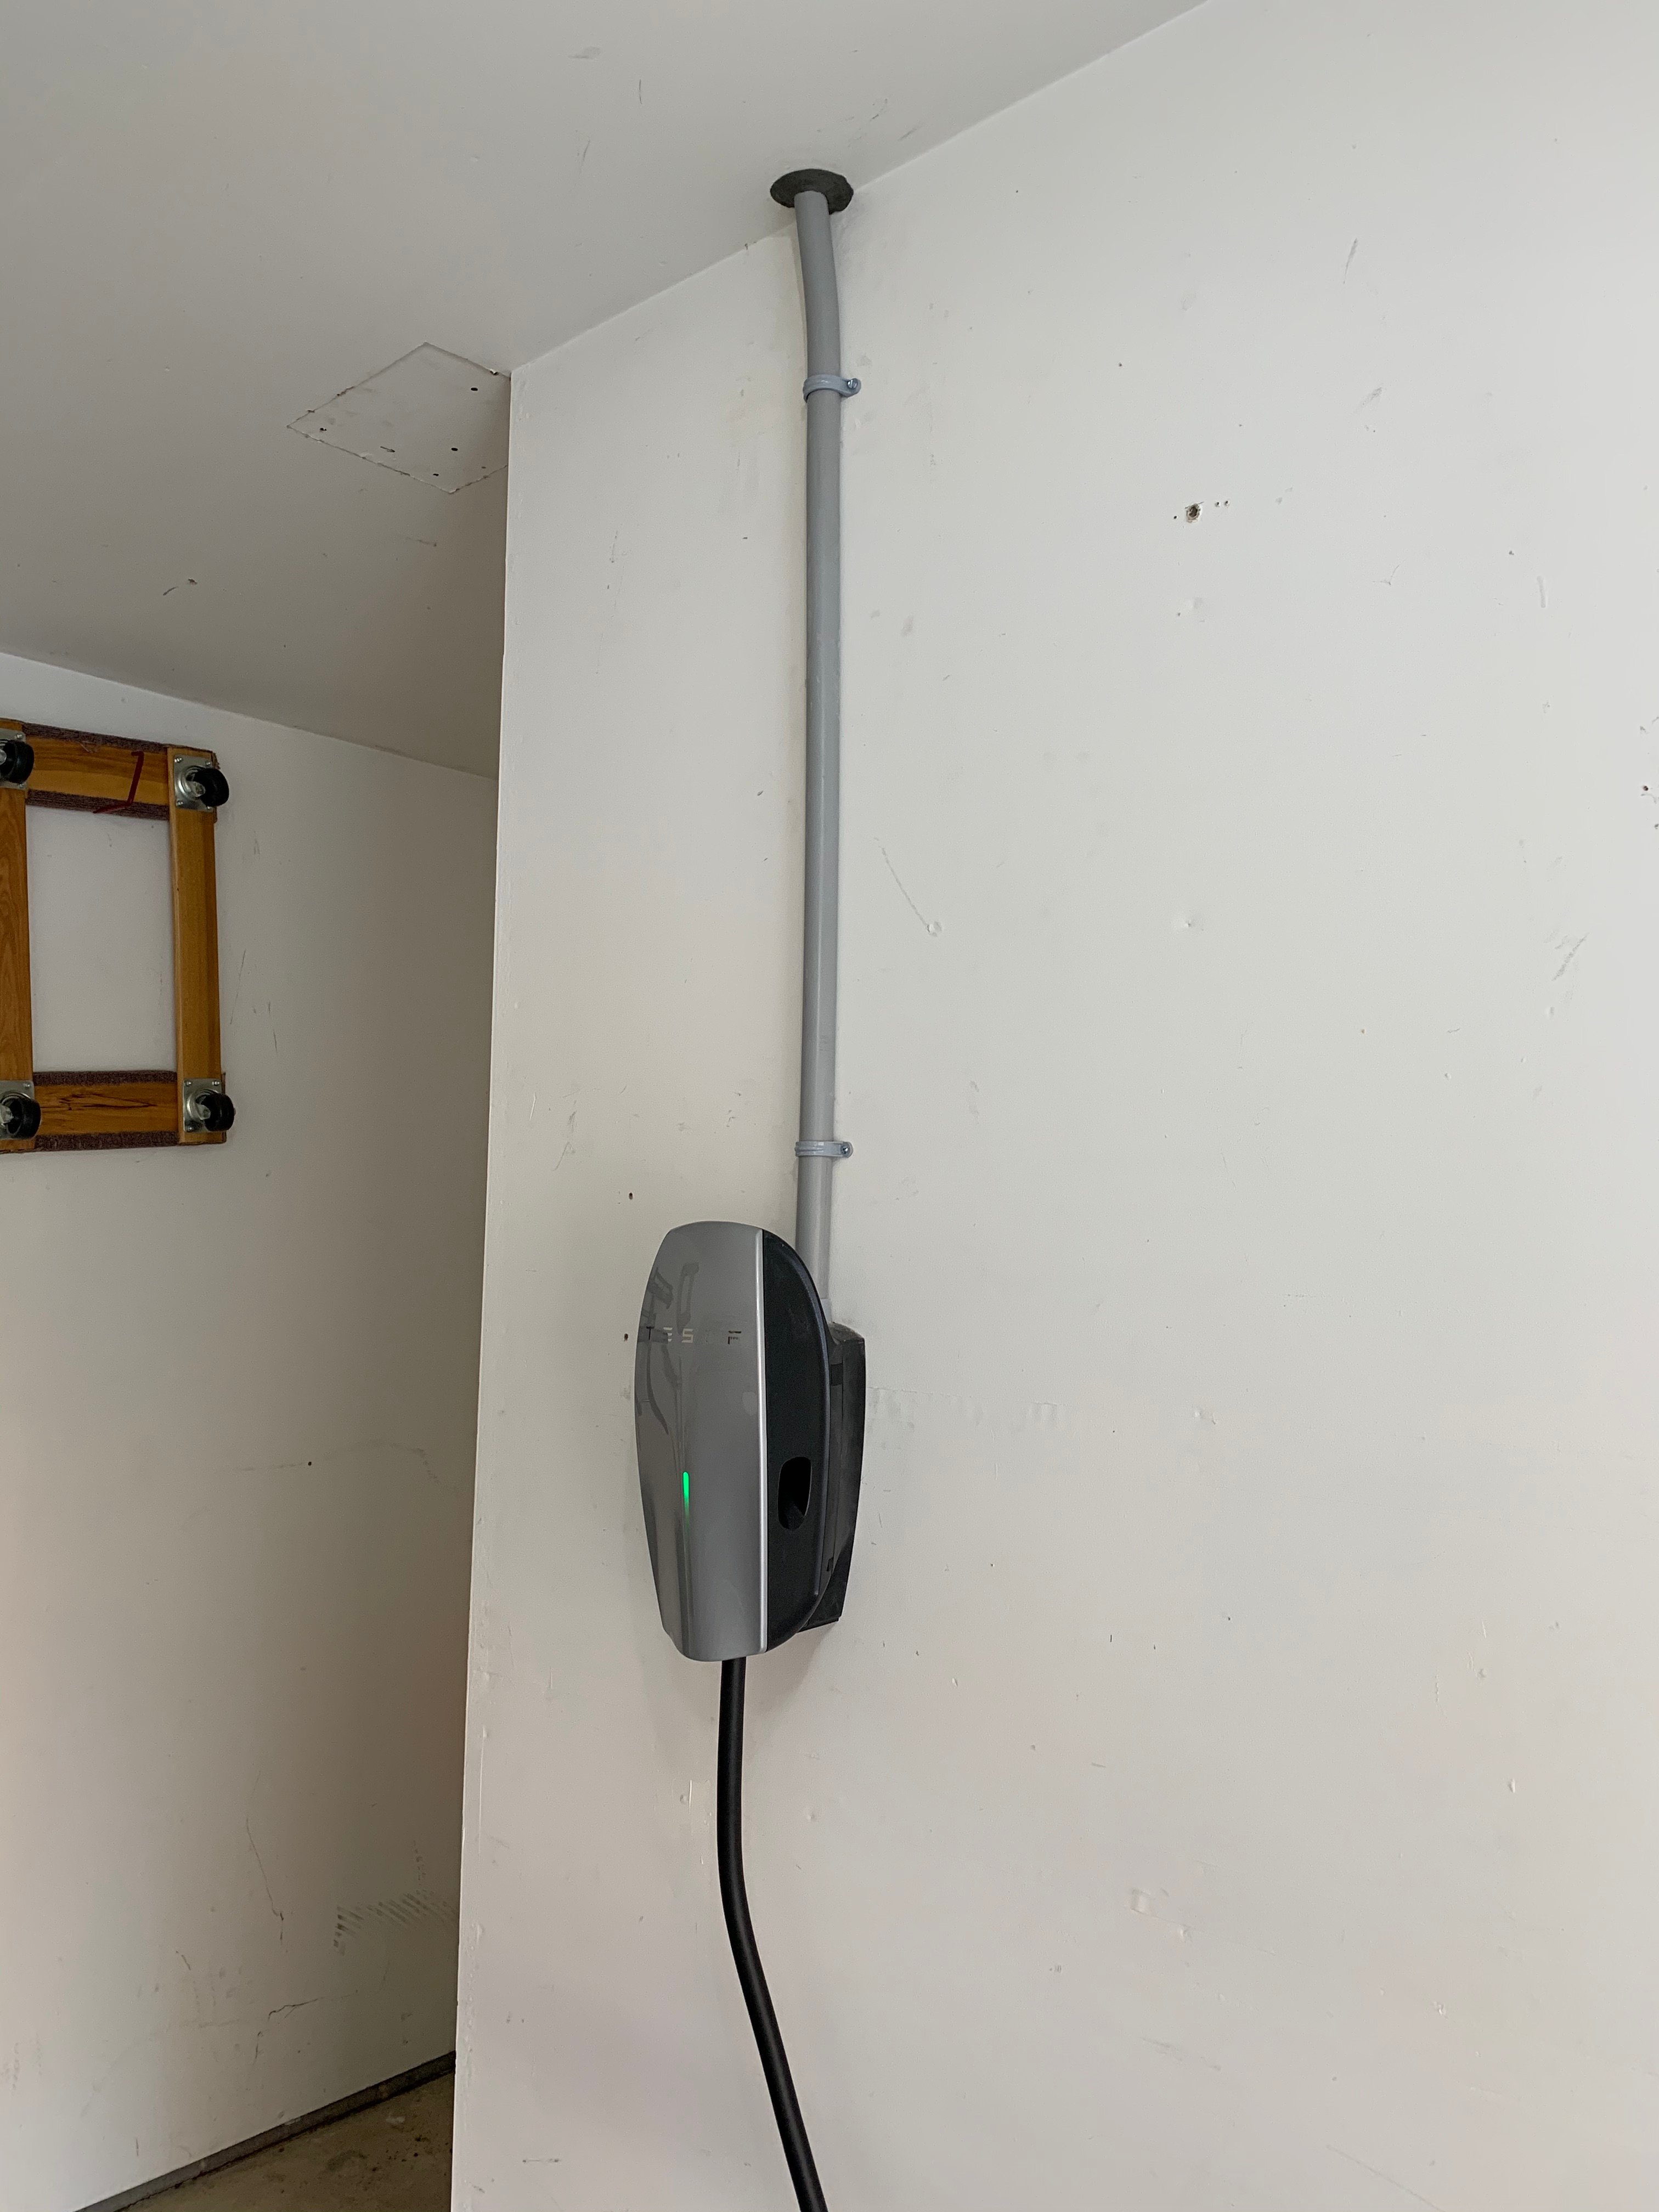 Tesla Wall Connector And Conduit 2